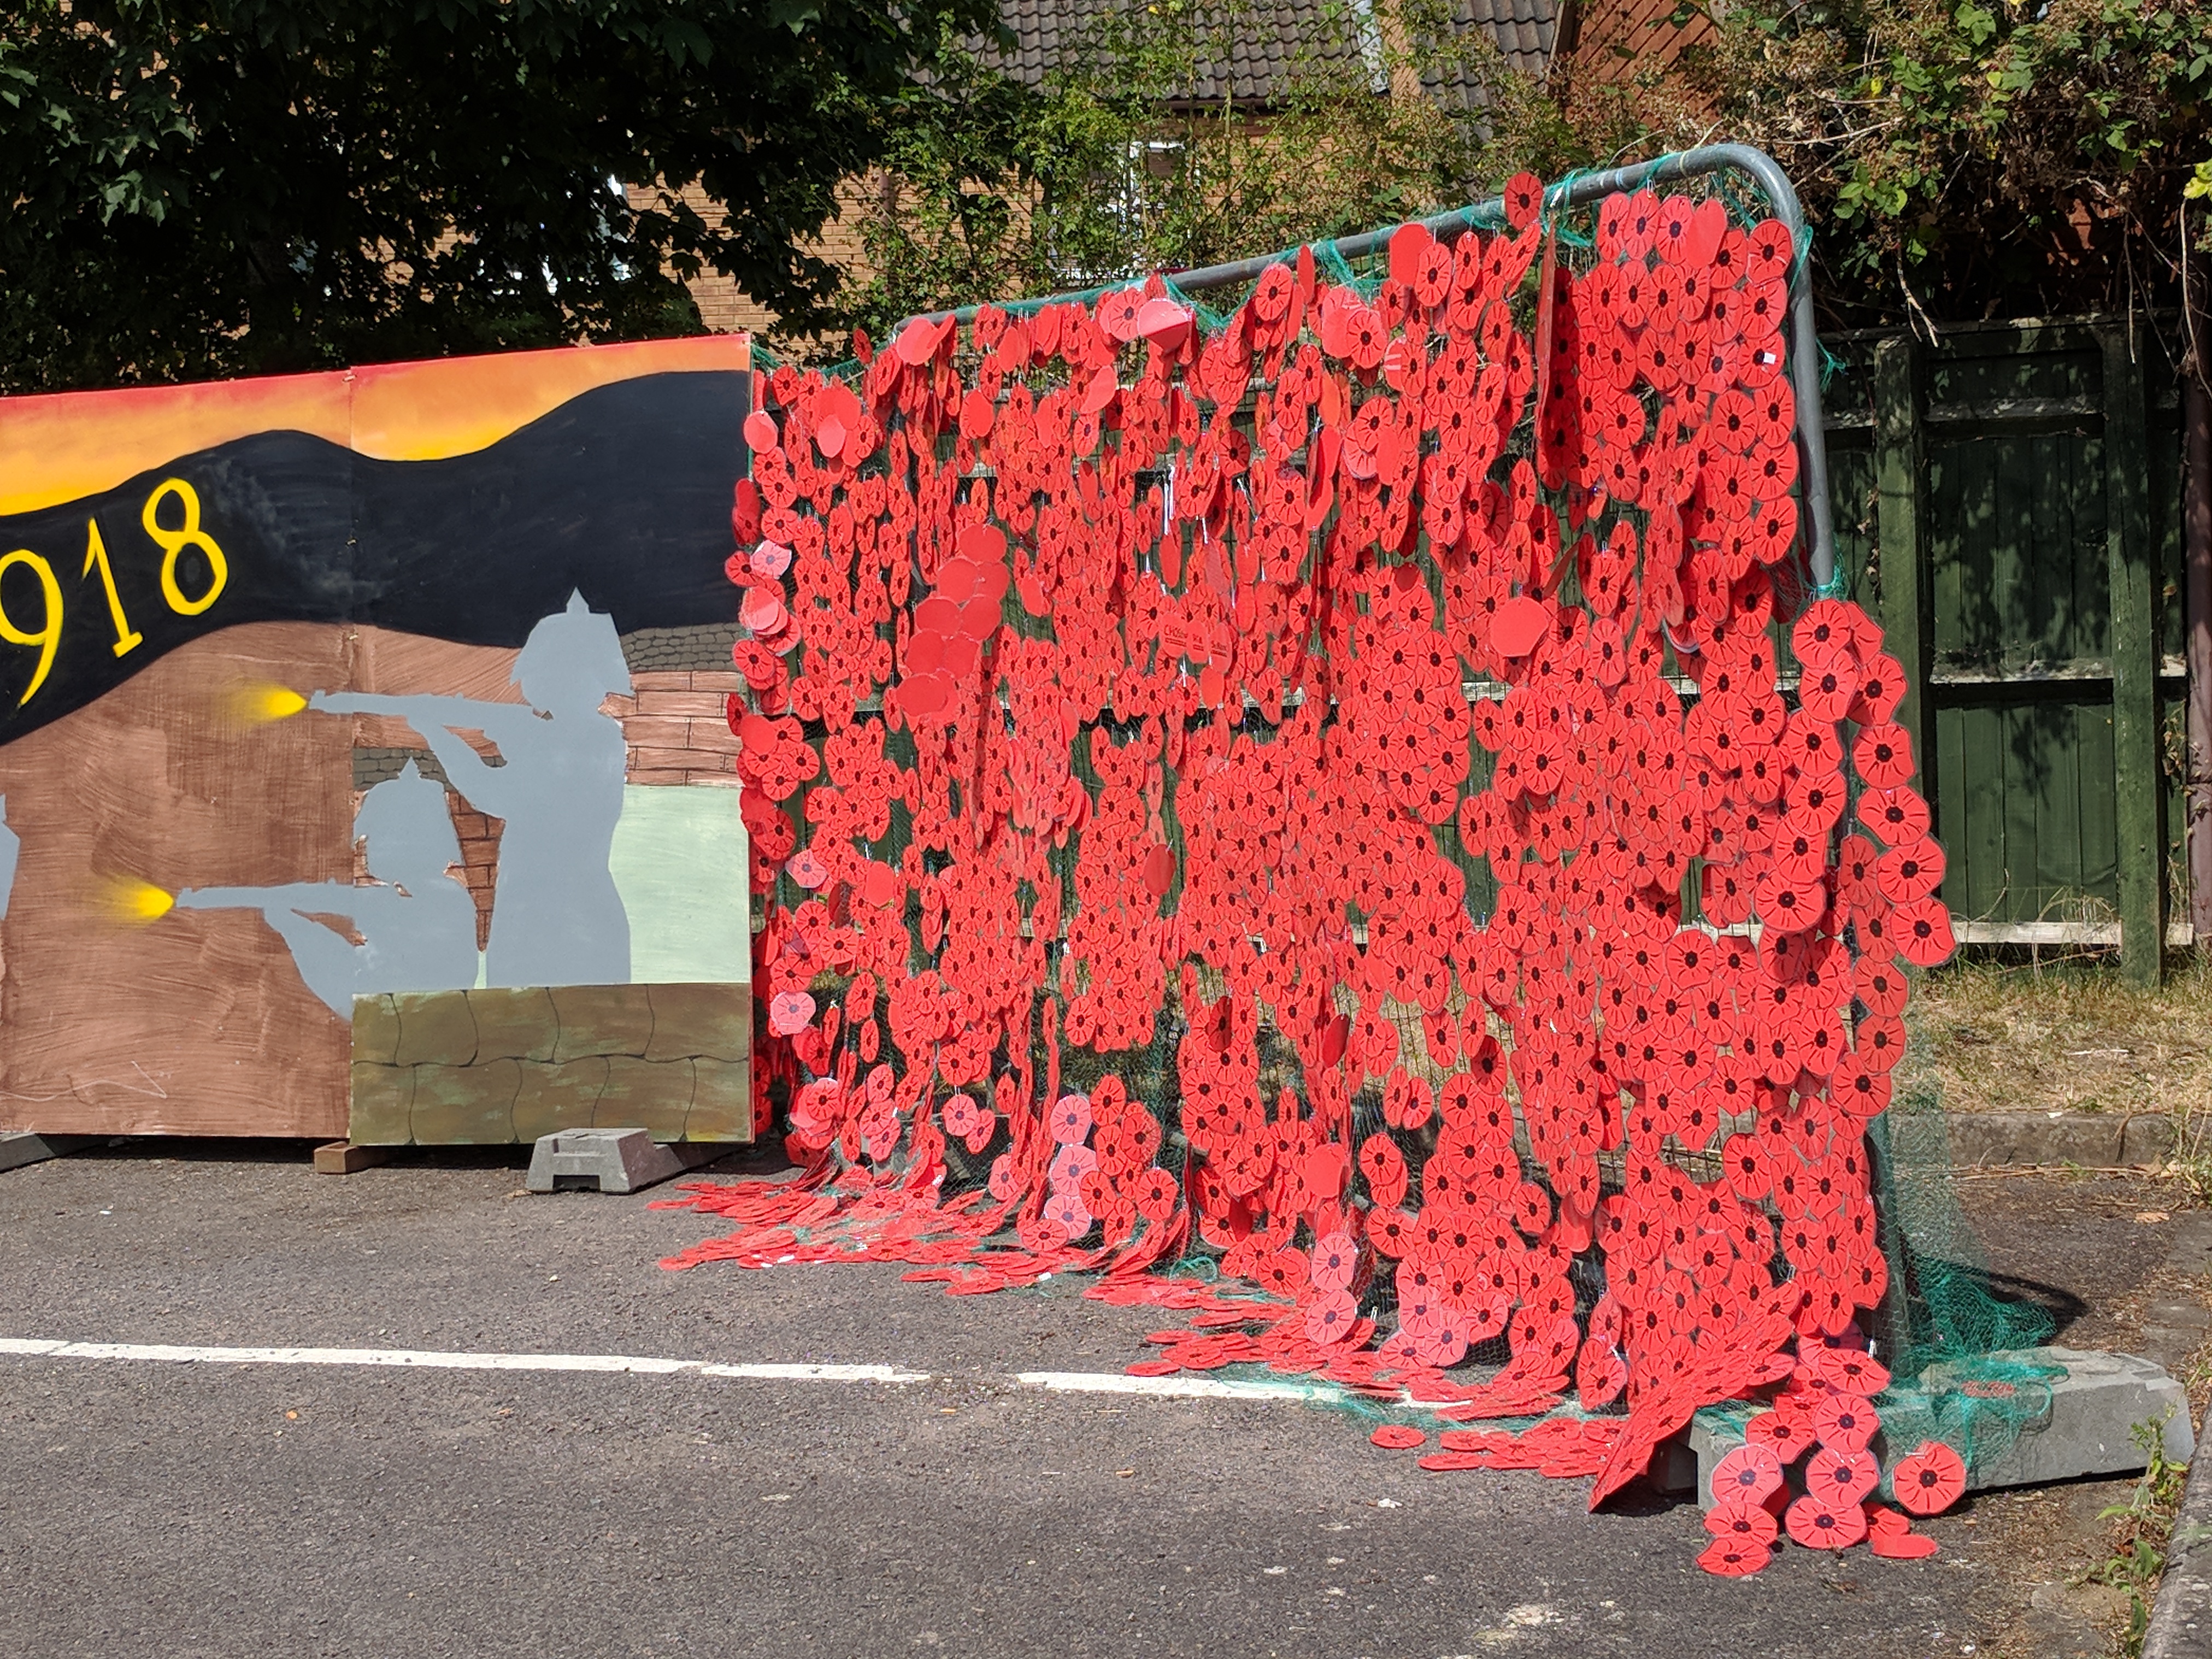 Picture of the Poppy Wall